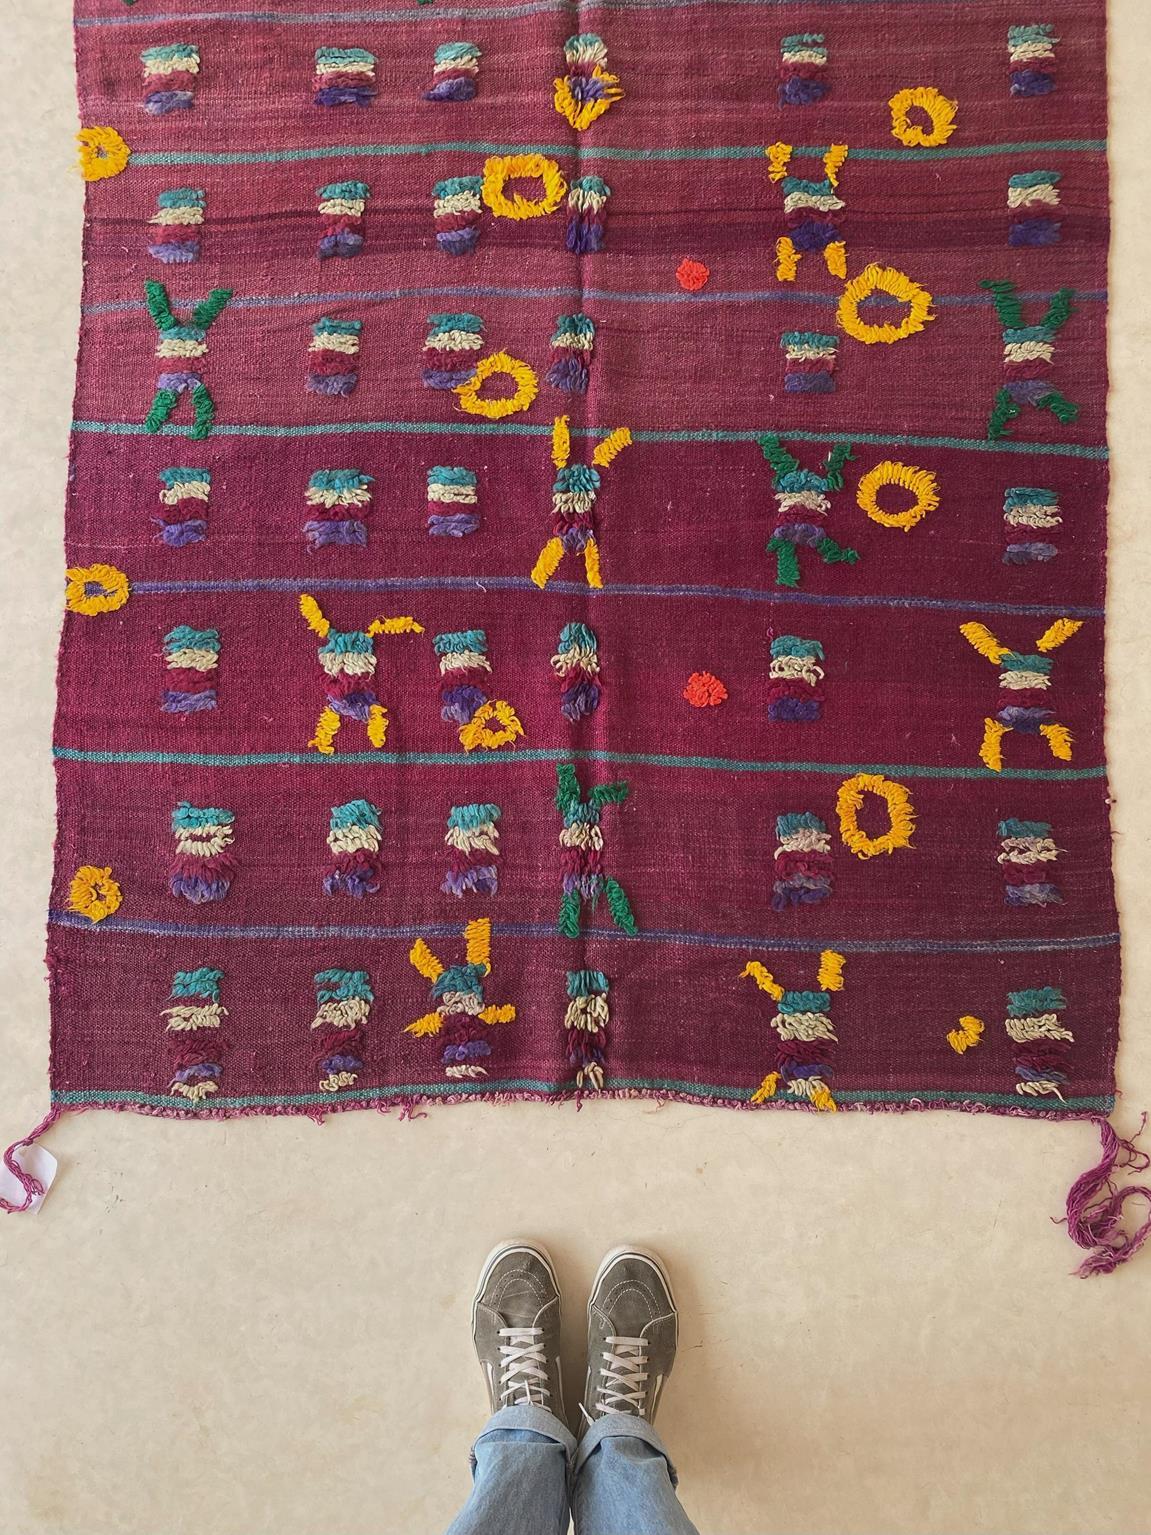 Vintage Moroccan Kilim textile - Purple and yellow - 4.1x8.3feet / 127x252cm For Sale 1